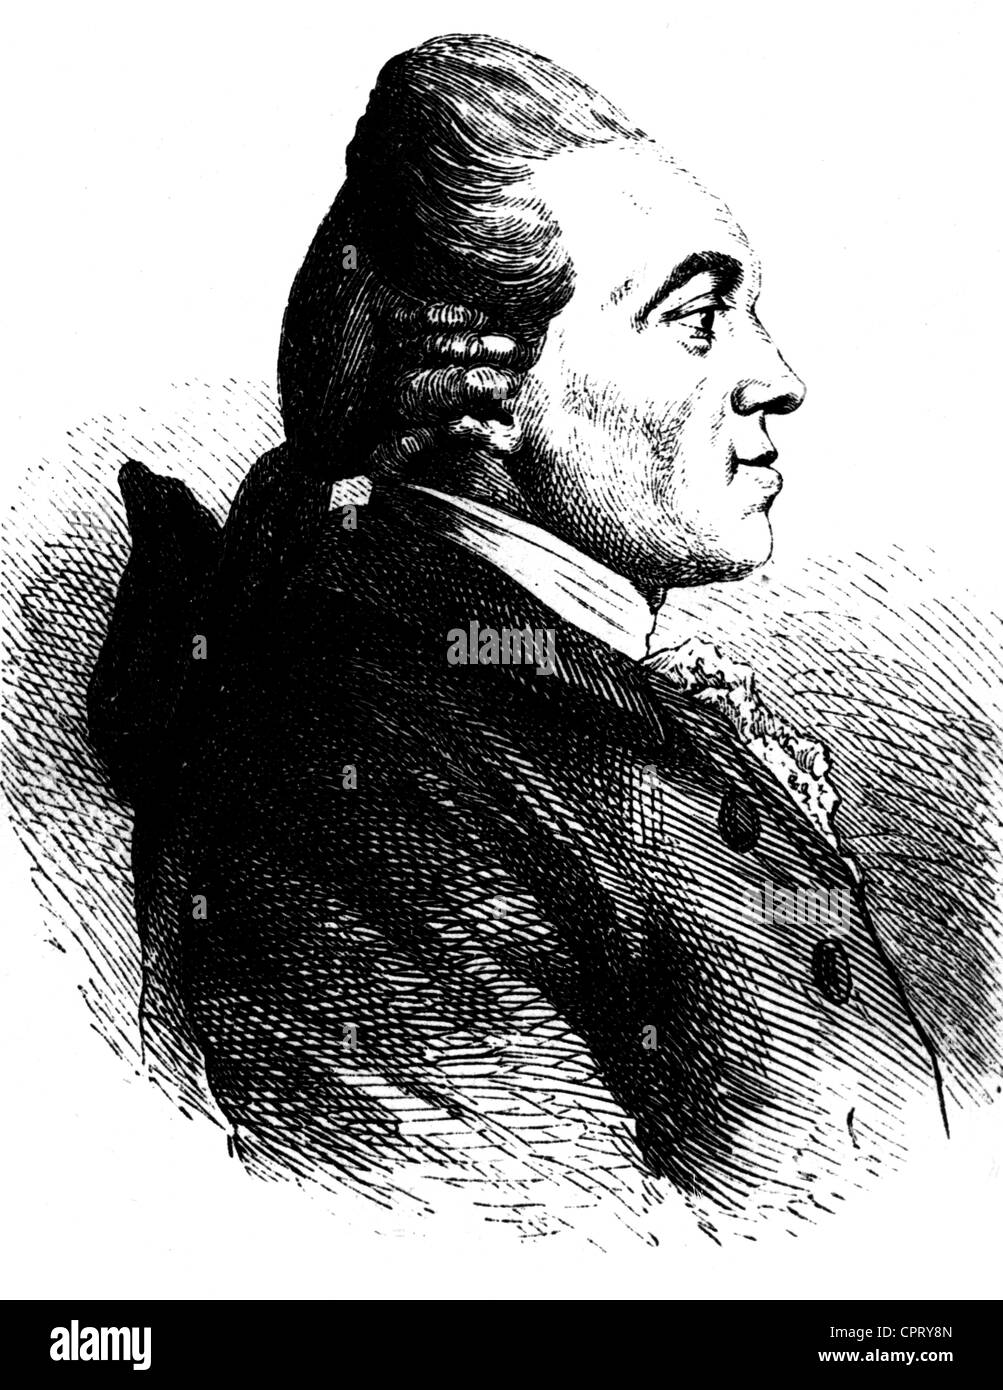 Nicolai, Christoph Friedrich, 18.3.1733 - 8.1.1811, German bookseller, author / writer, portrait, wood engraving, before 1883, Stock Photo